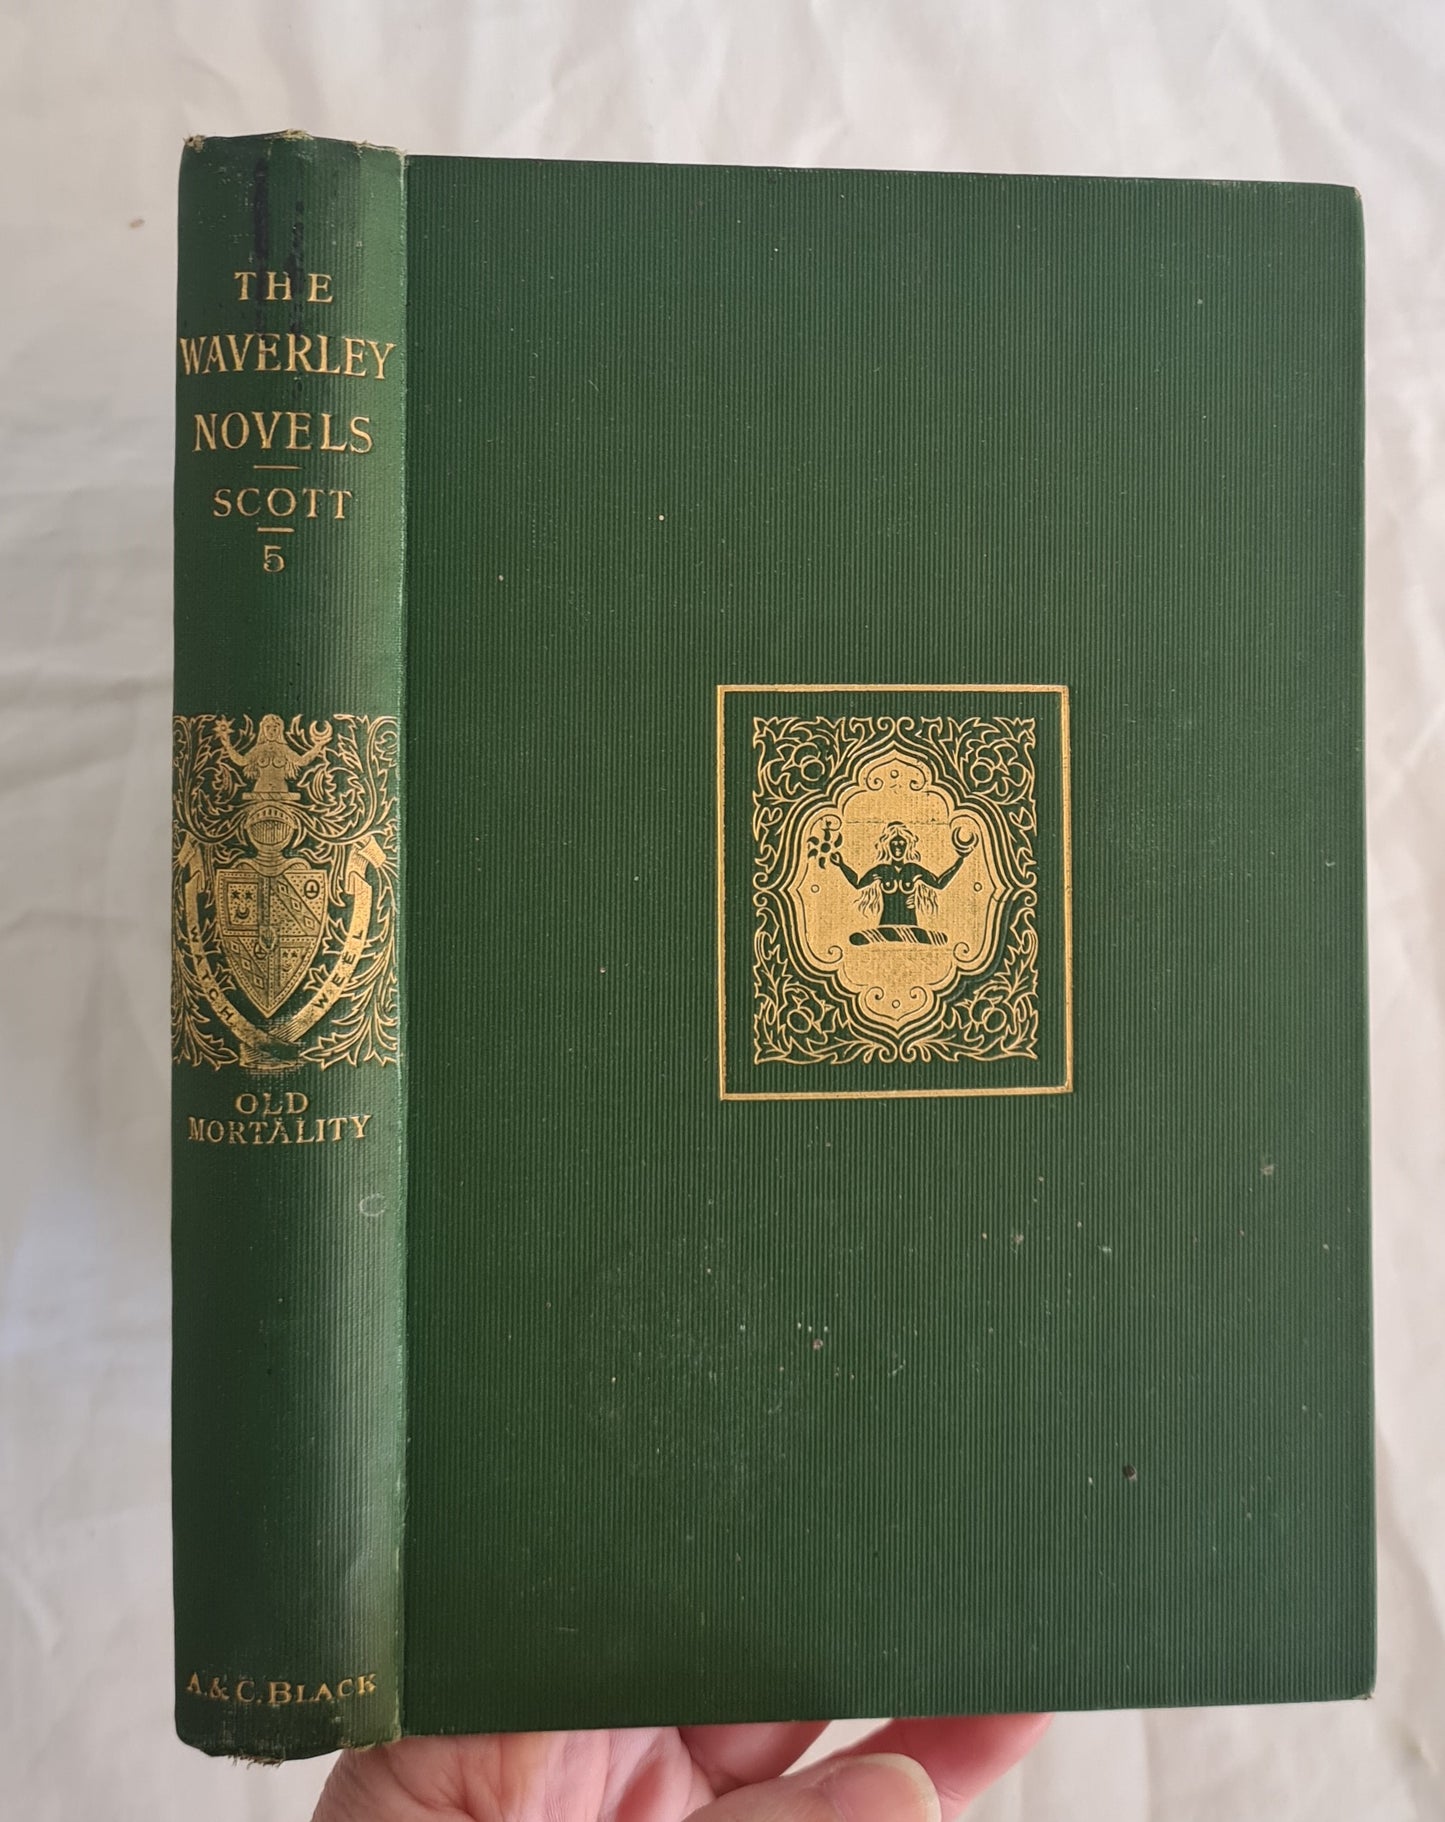 The Waverley Novels  by Sir Walter Scott  Old Mortality  Volume 5